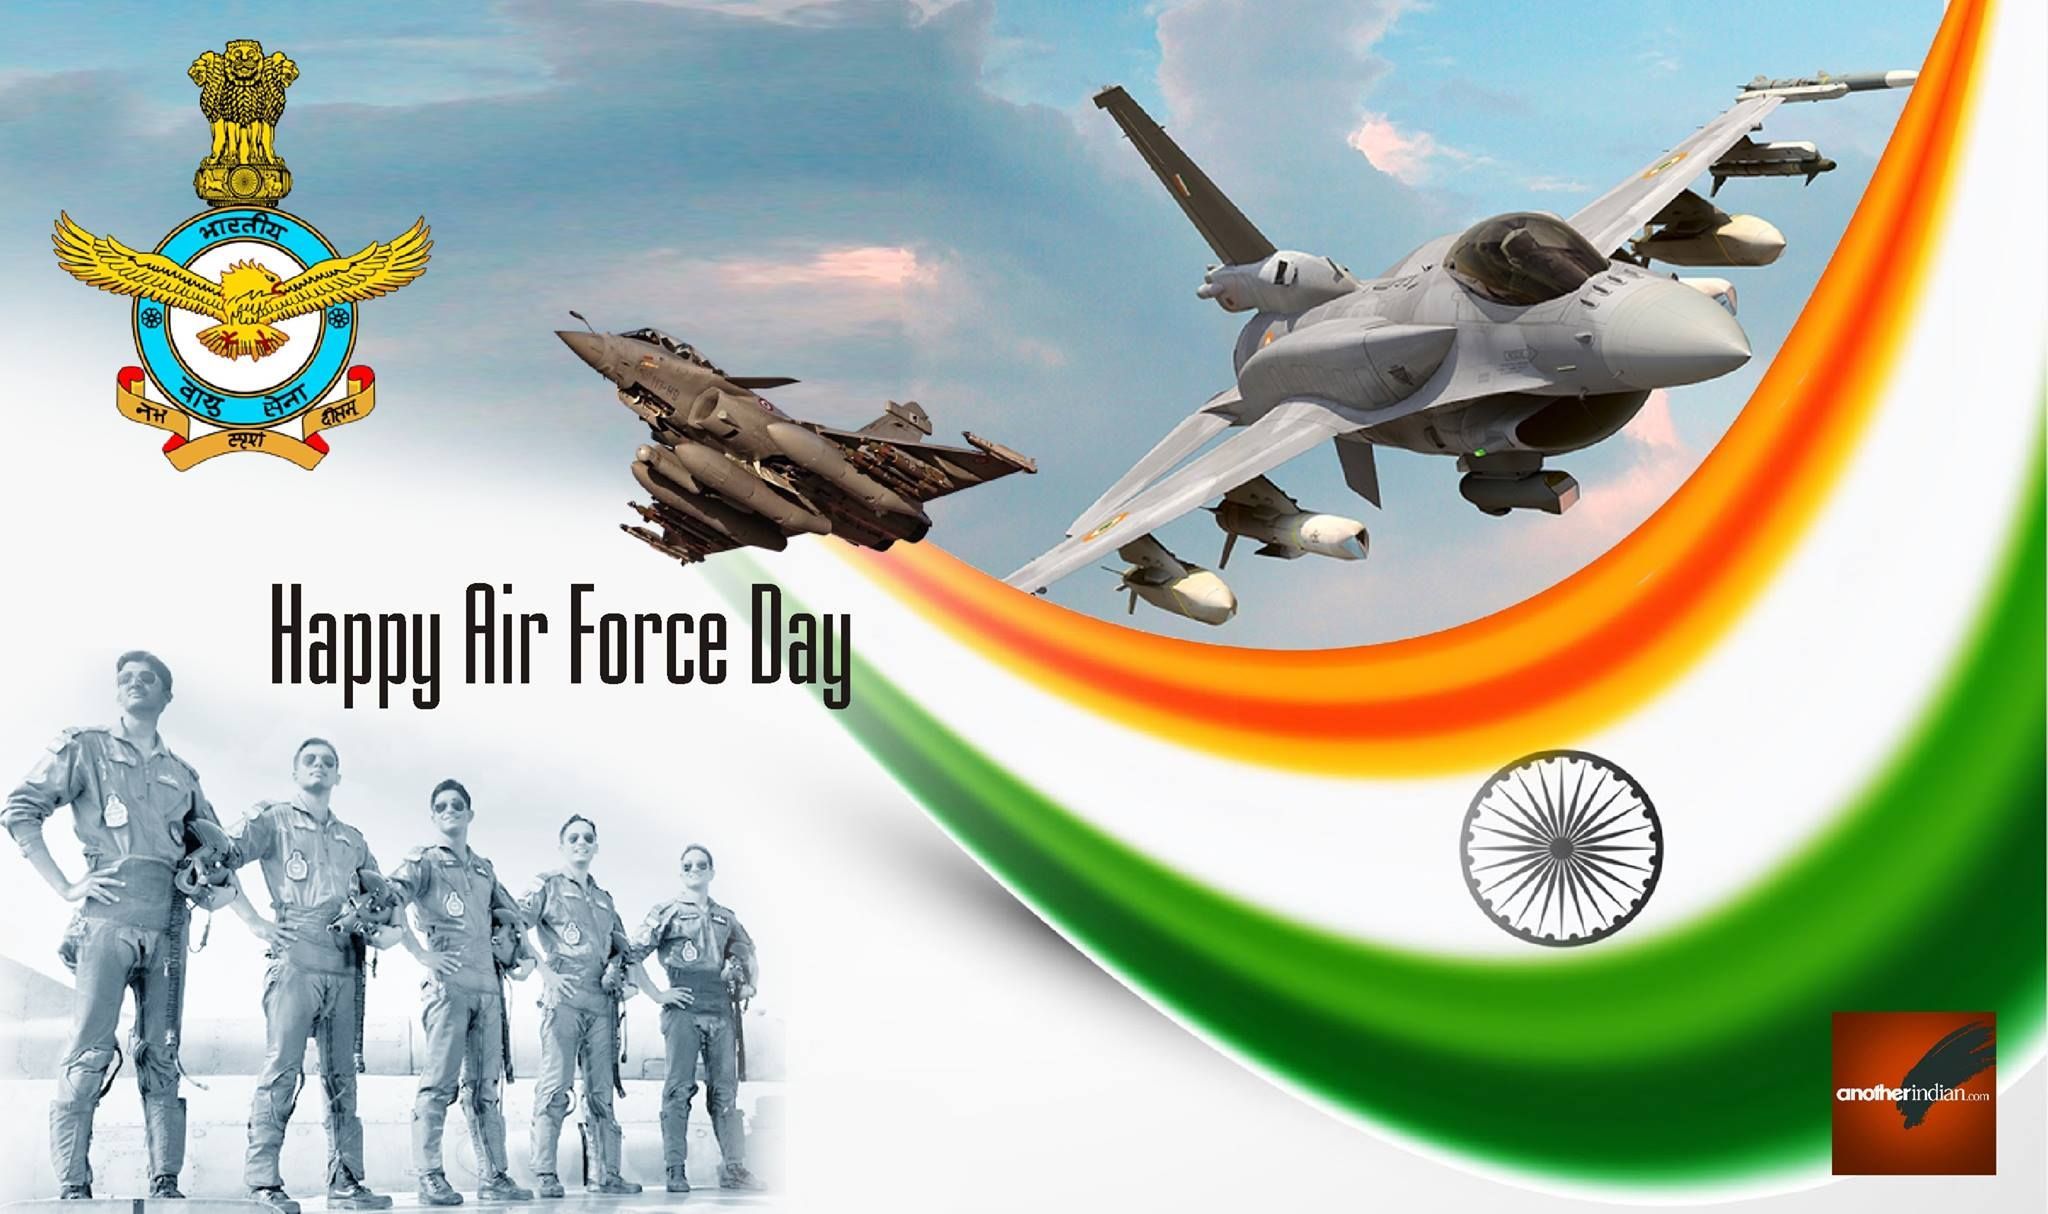 Celebrating Indian Air Force Day with Some mind blowing facts about the Indian Air Force. Air force day, Indian air force, Army day